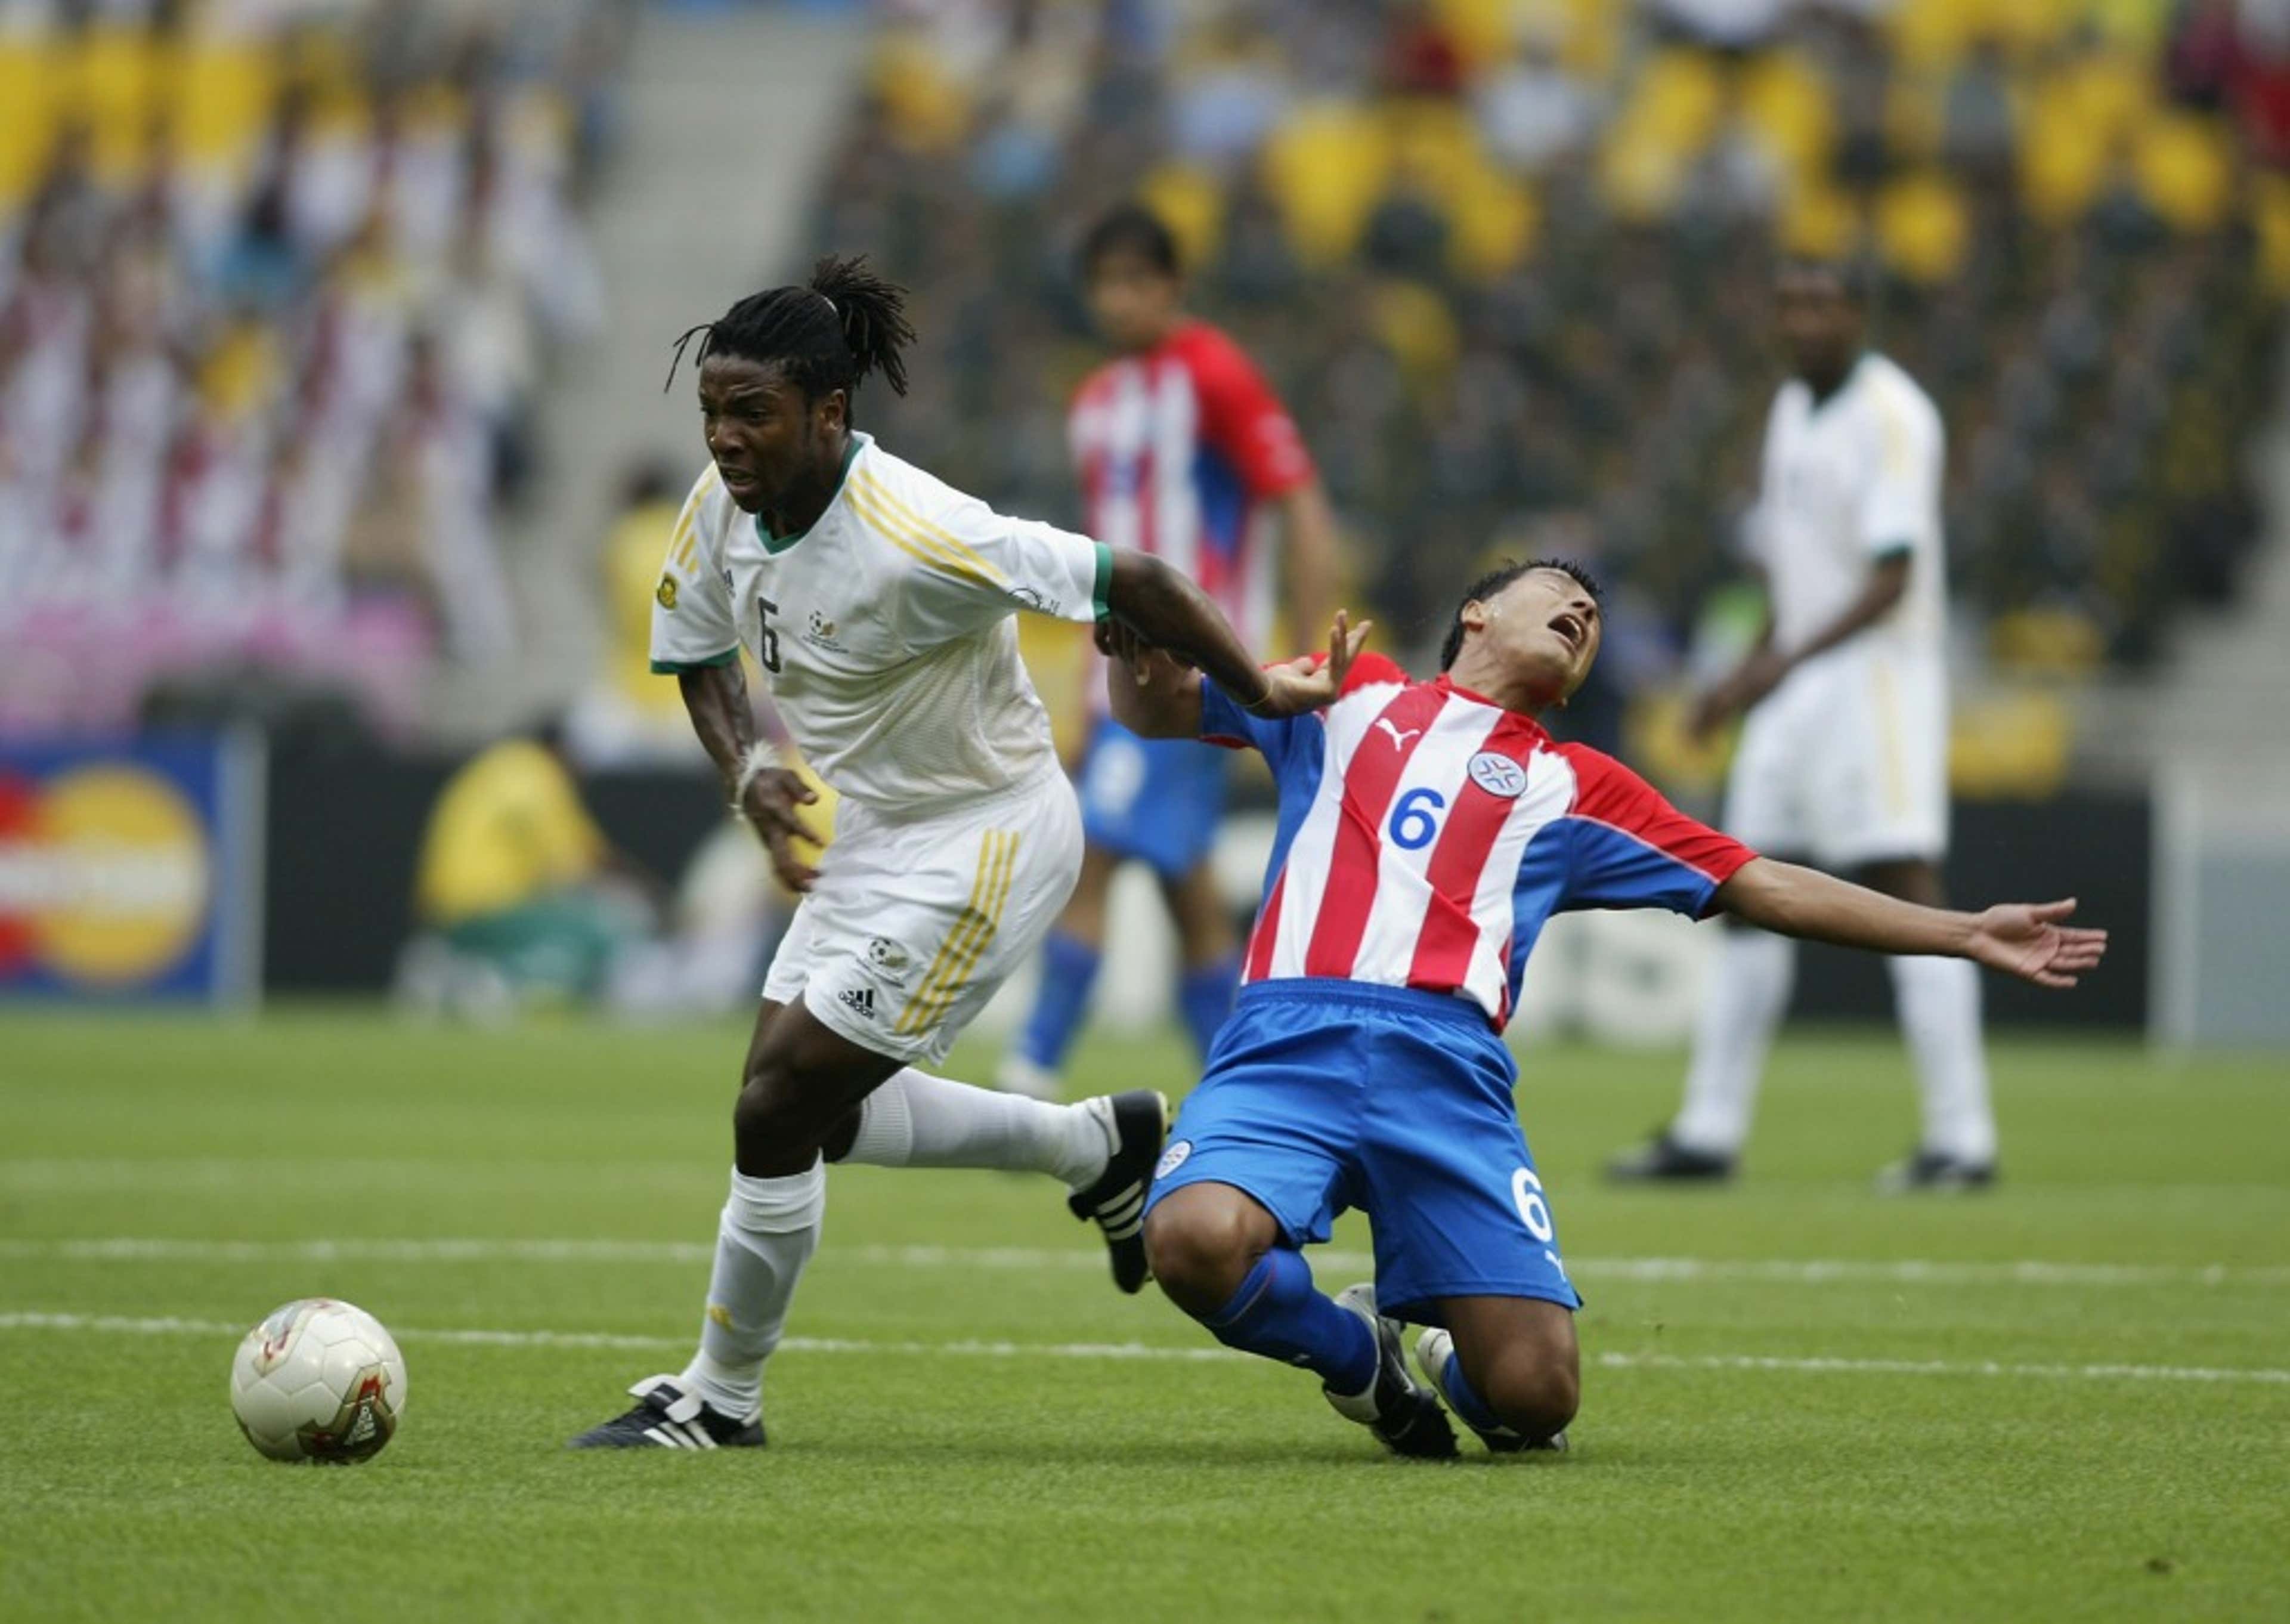 South Africa versus Paraguay 2002 World Cup